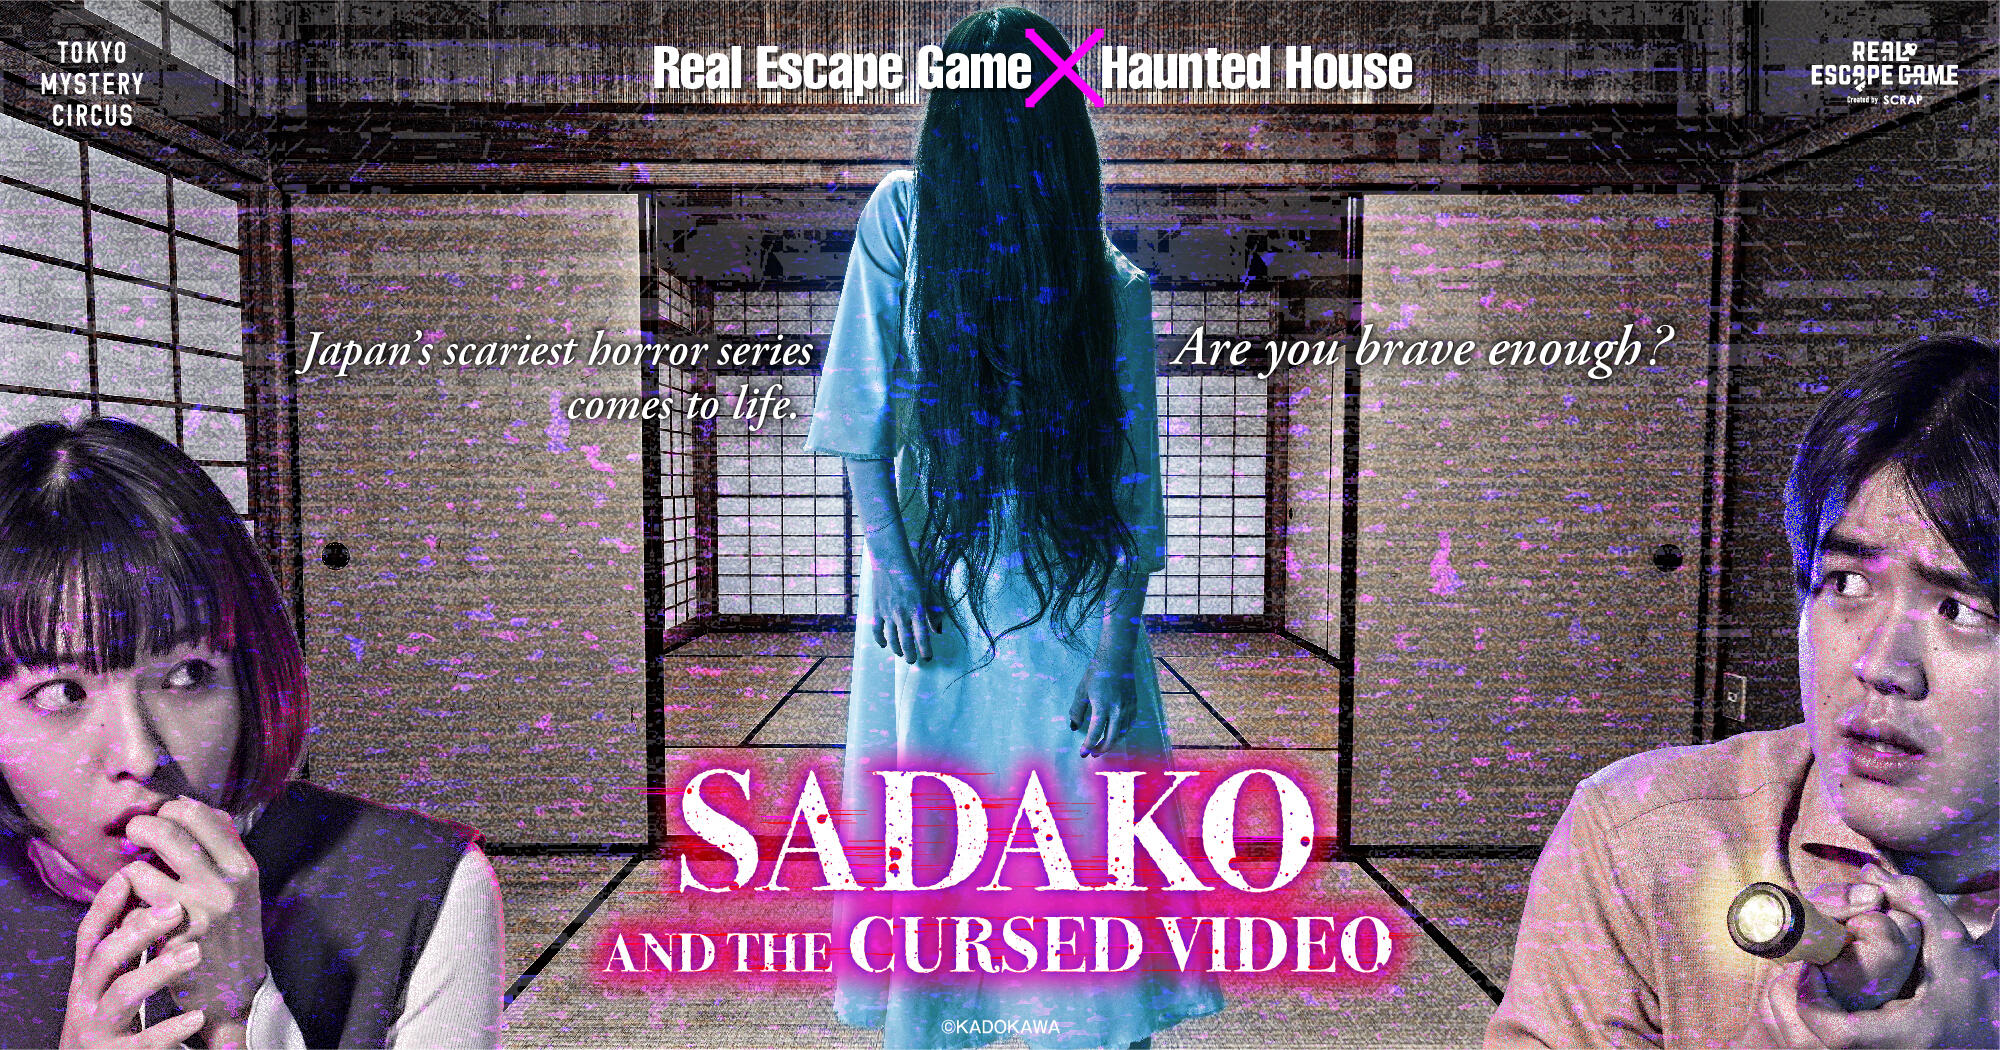 Real Escape Game x Haunted House: Japan's scariest horror series comes to life! Are you brave enough?